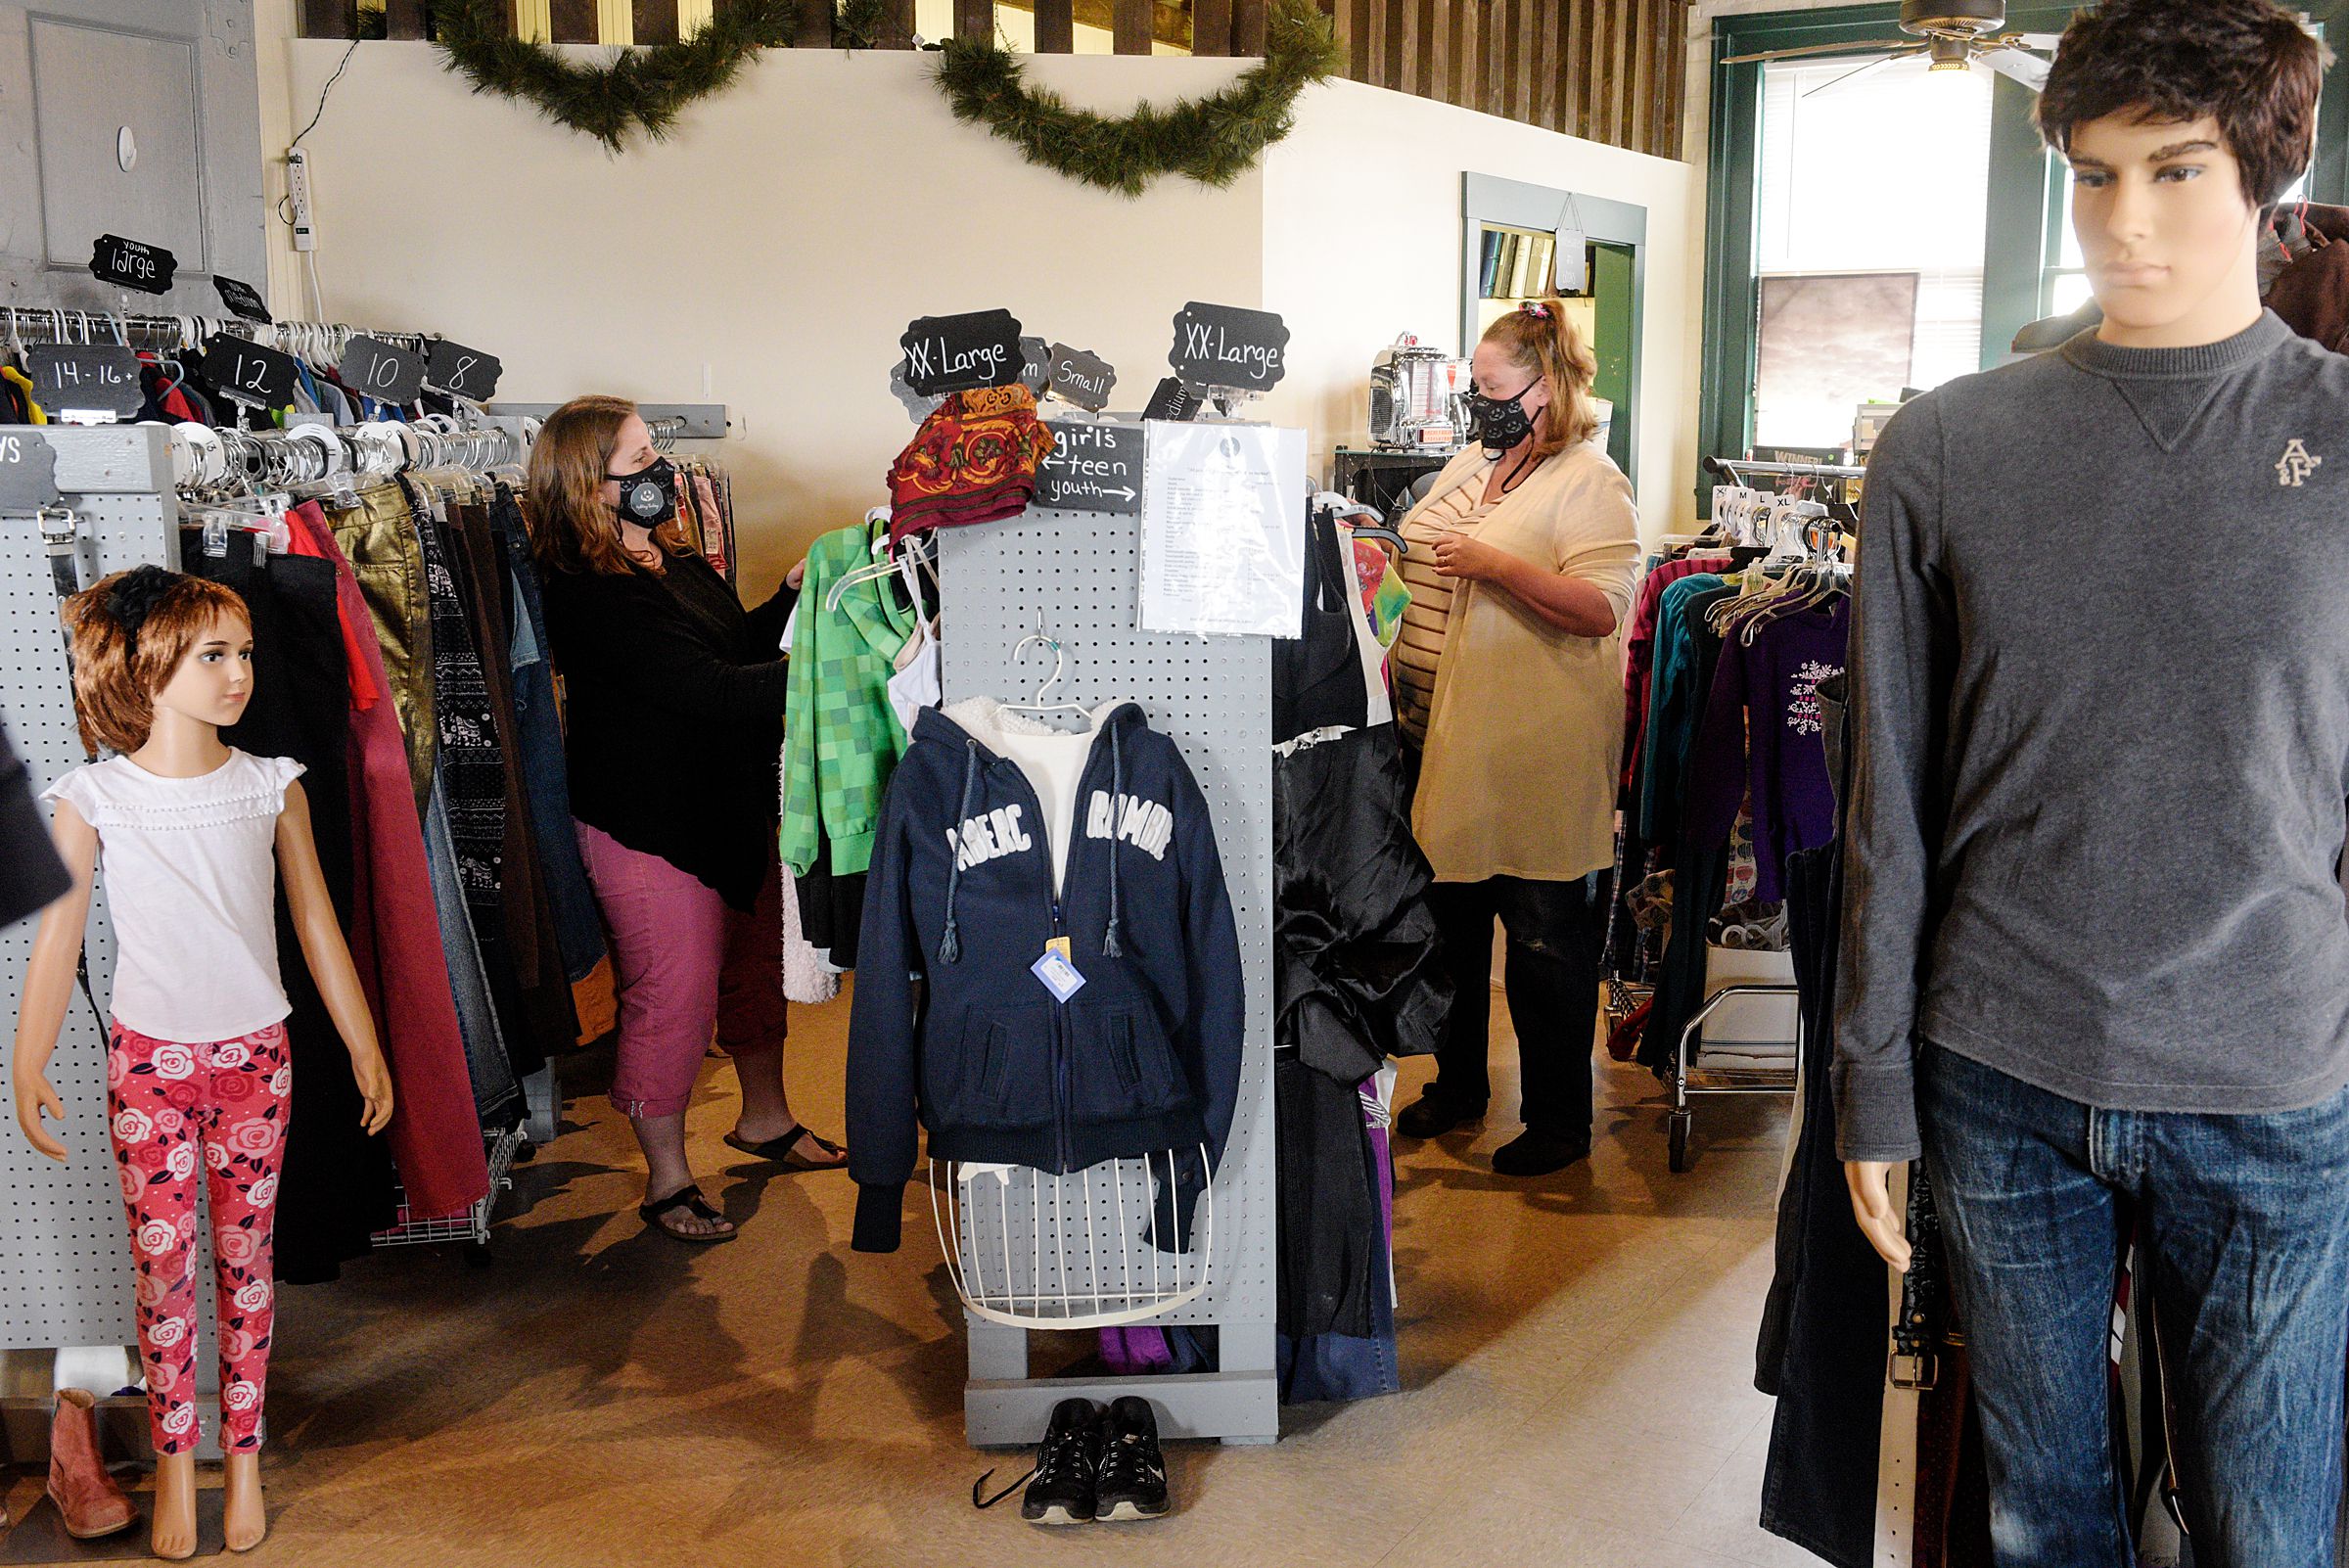 Gail Egner, owner of Uplifting Thrifting, left, and Jaime Neily, right, rotate inventory on the racks at the store in White River Junction, Vt., Thursday, March 25, 2021. A year and three months after opening in the White River Junction train station, Egner has weathered the worst of the pandemic with curbside service, opened the business to some consignment, and continues efforts to serve families suffering after house fires. (Valley News - James M. Patterson) Copyright Valley News. May not be reprinted or used online without permission. Send requests to permission@vnews.com.